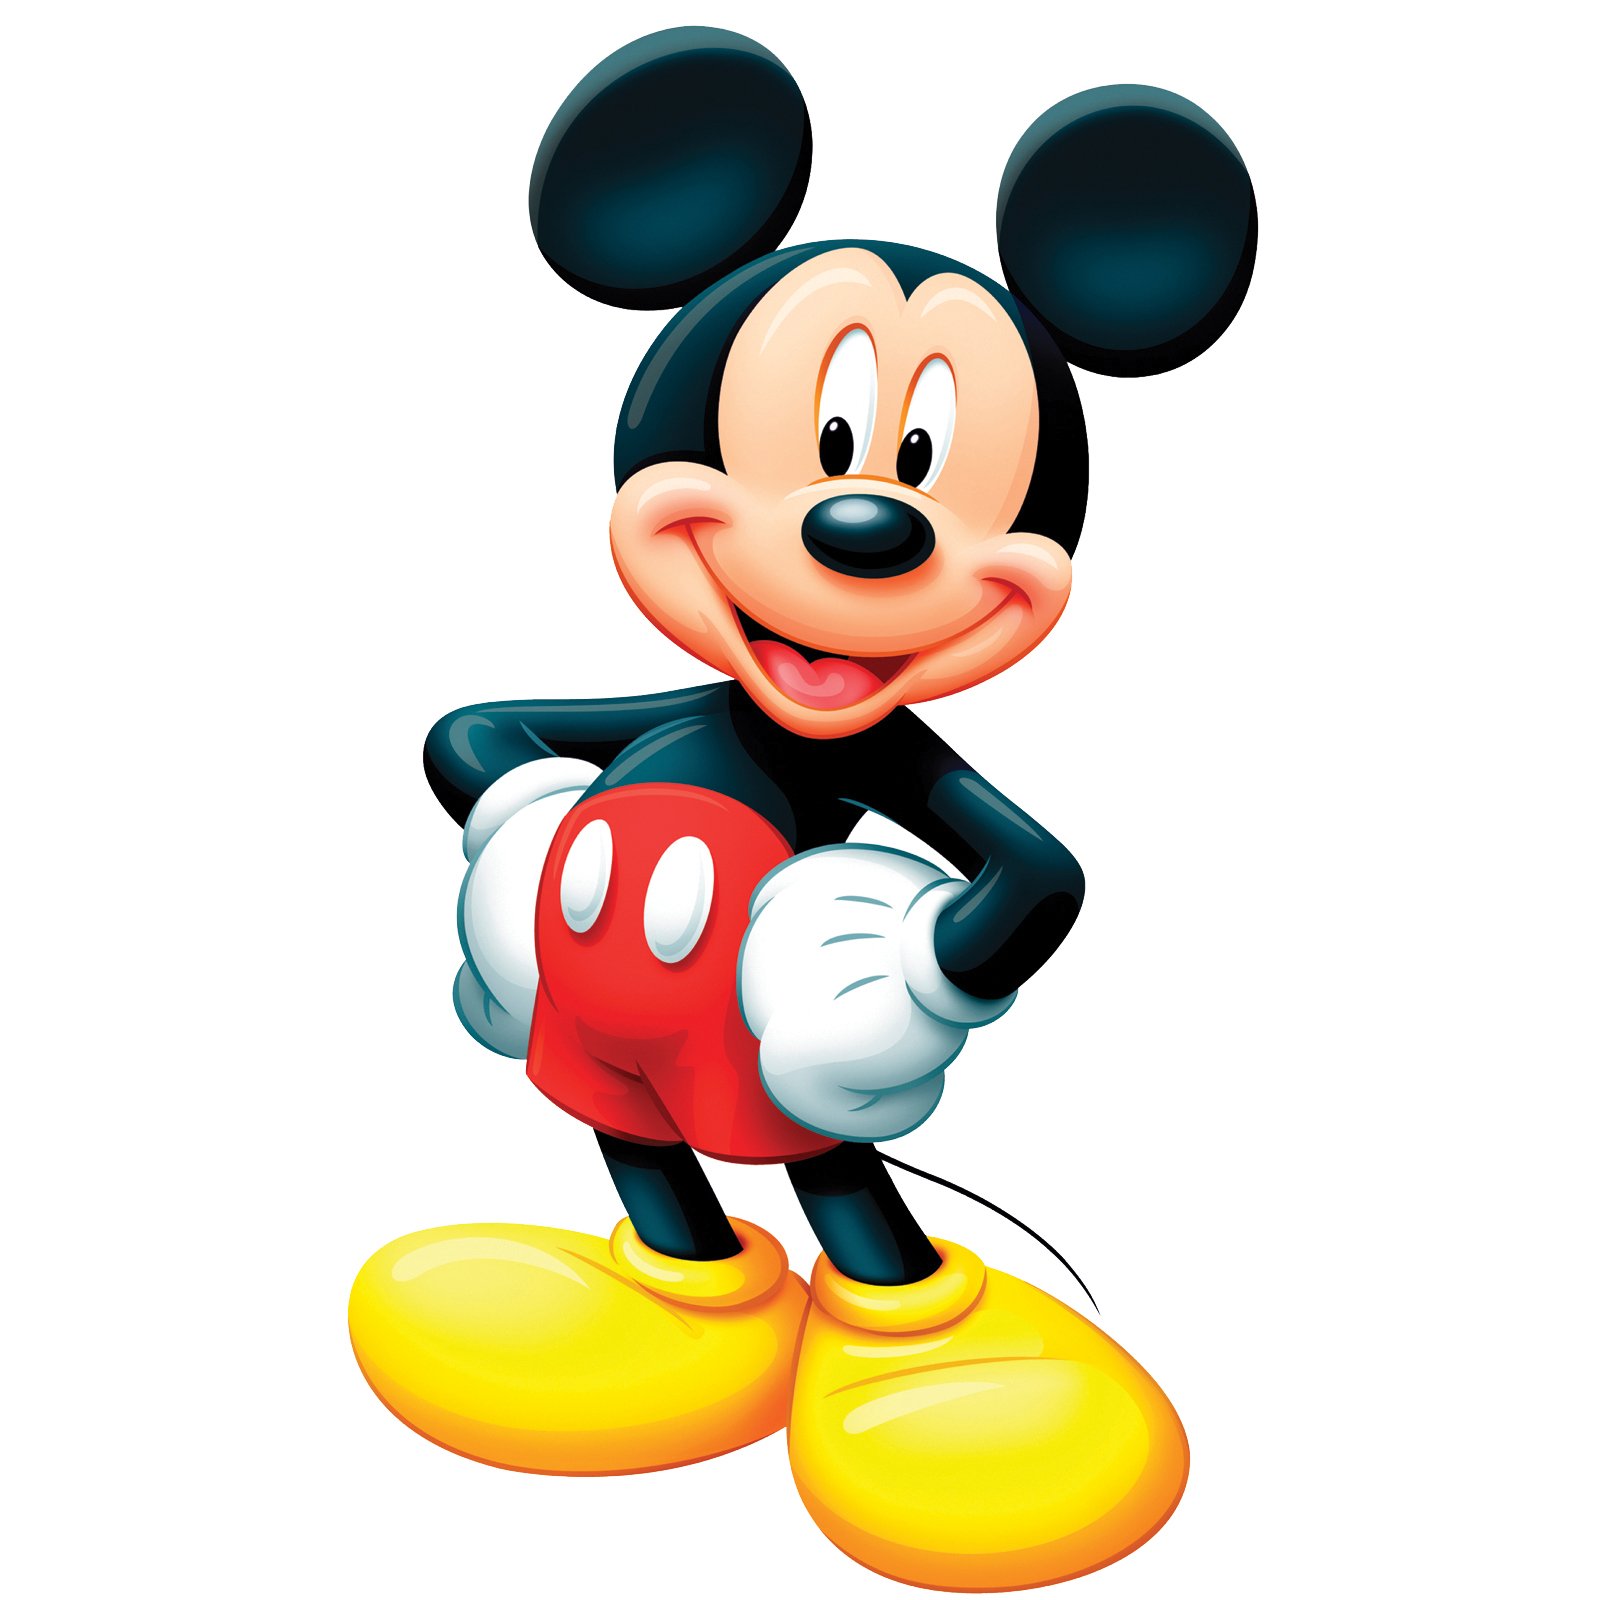 Mickey Mouse Face 1275 Hd Wallpapers in Cartoons - Imagesci.com